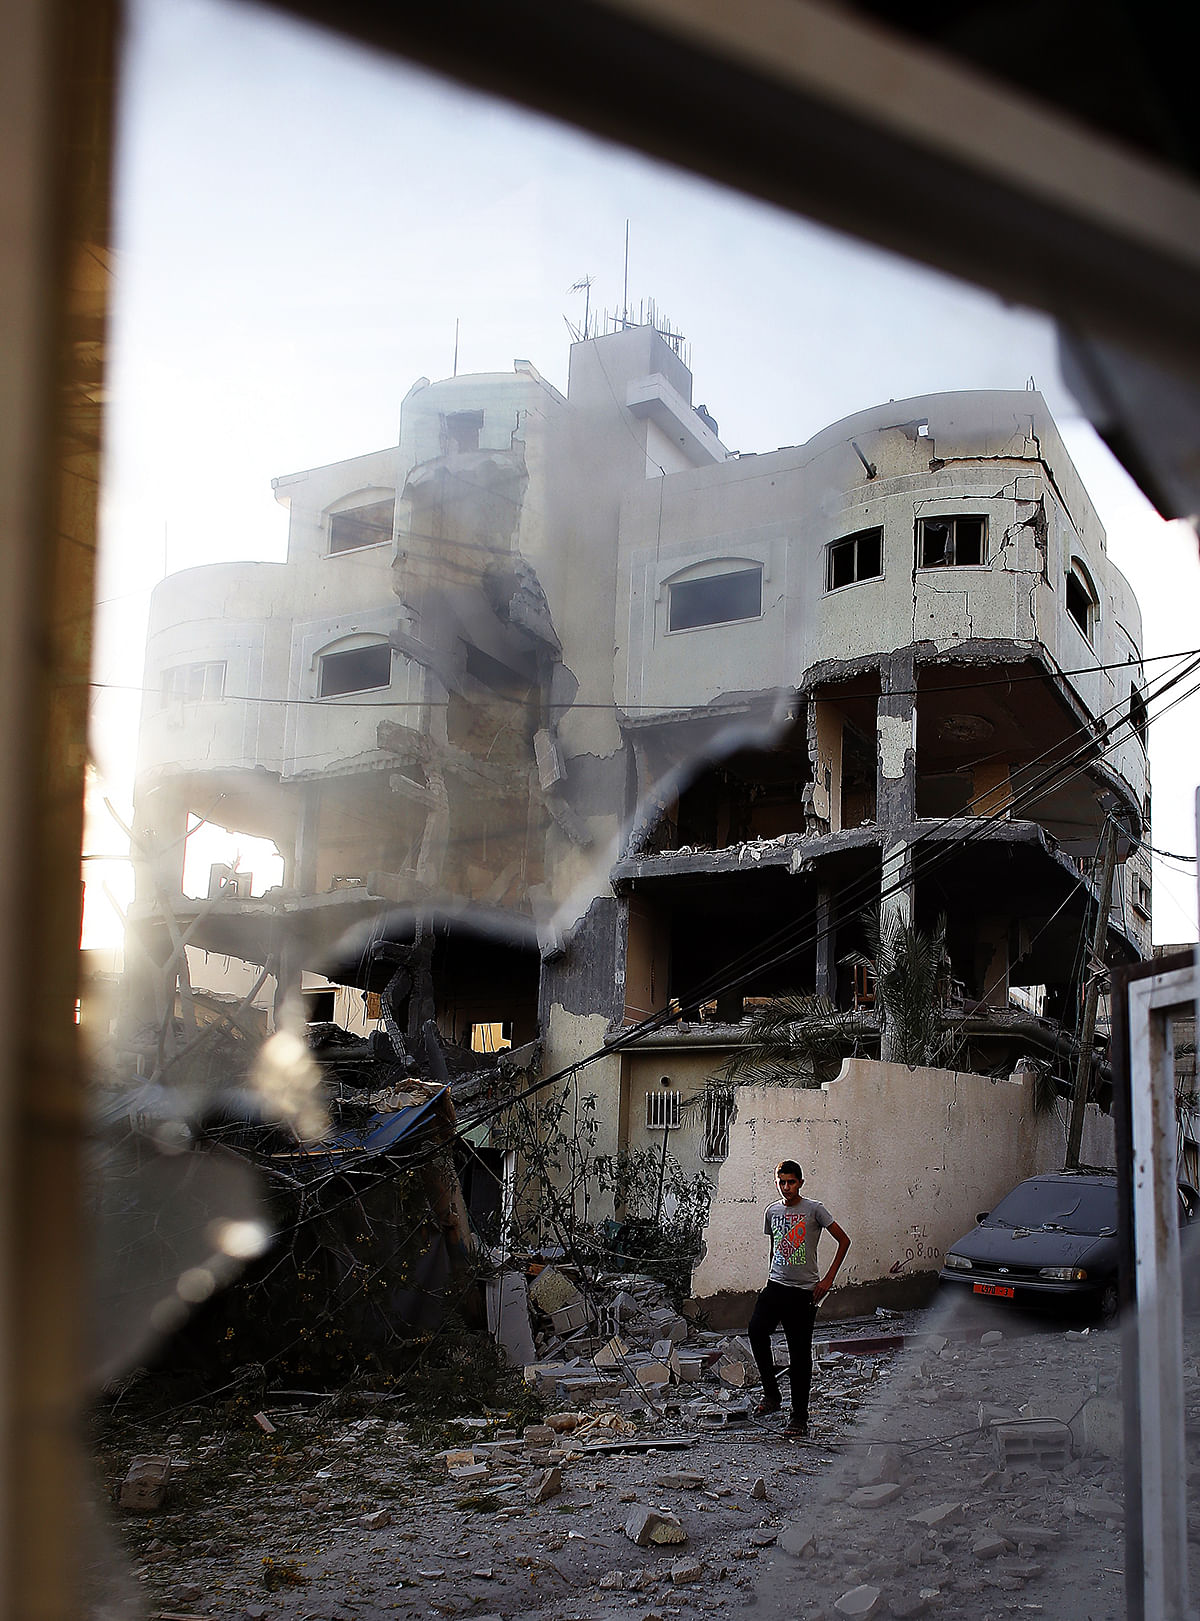 A Palestinian man walks past the house of senior Hamas official Mahmud al-Zahar after it was destroyed by an overnight Israeli air strike, on July 16, 2014, in Gaza City. Photo: Getty Images